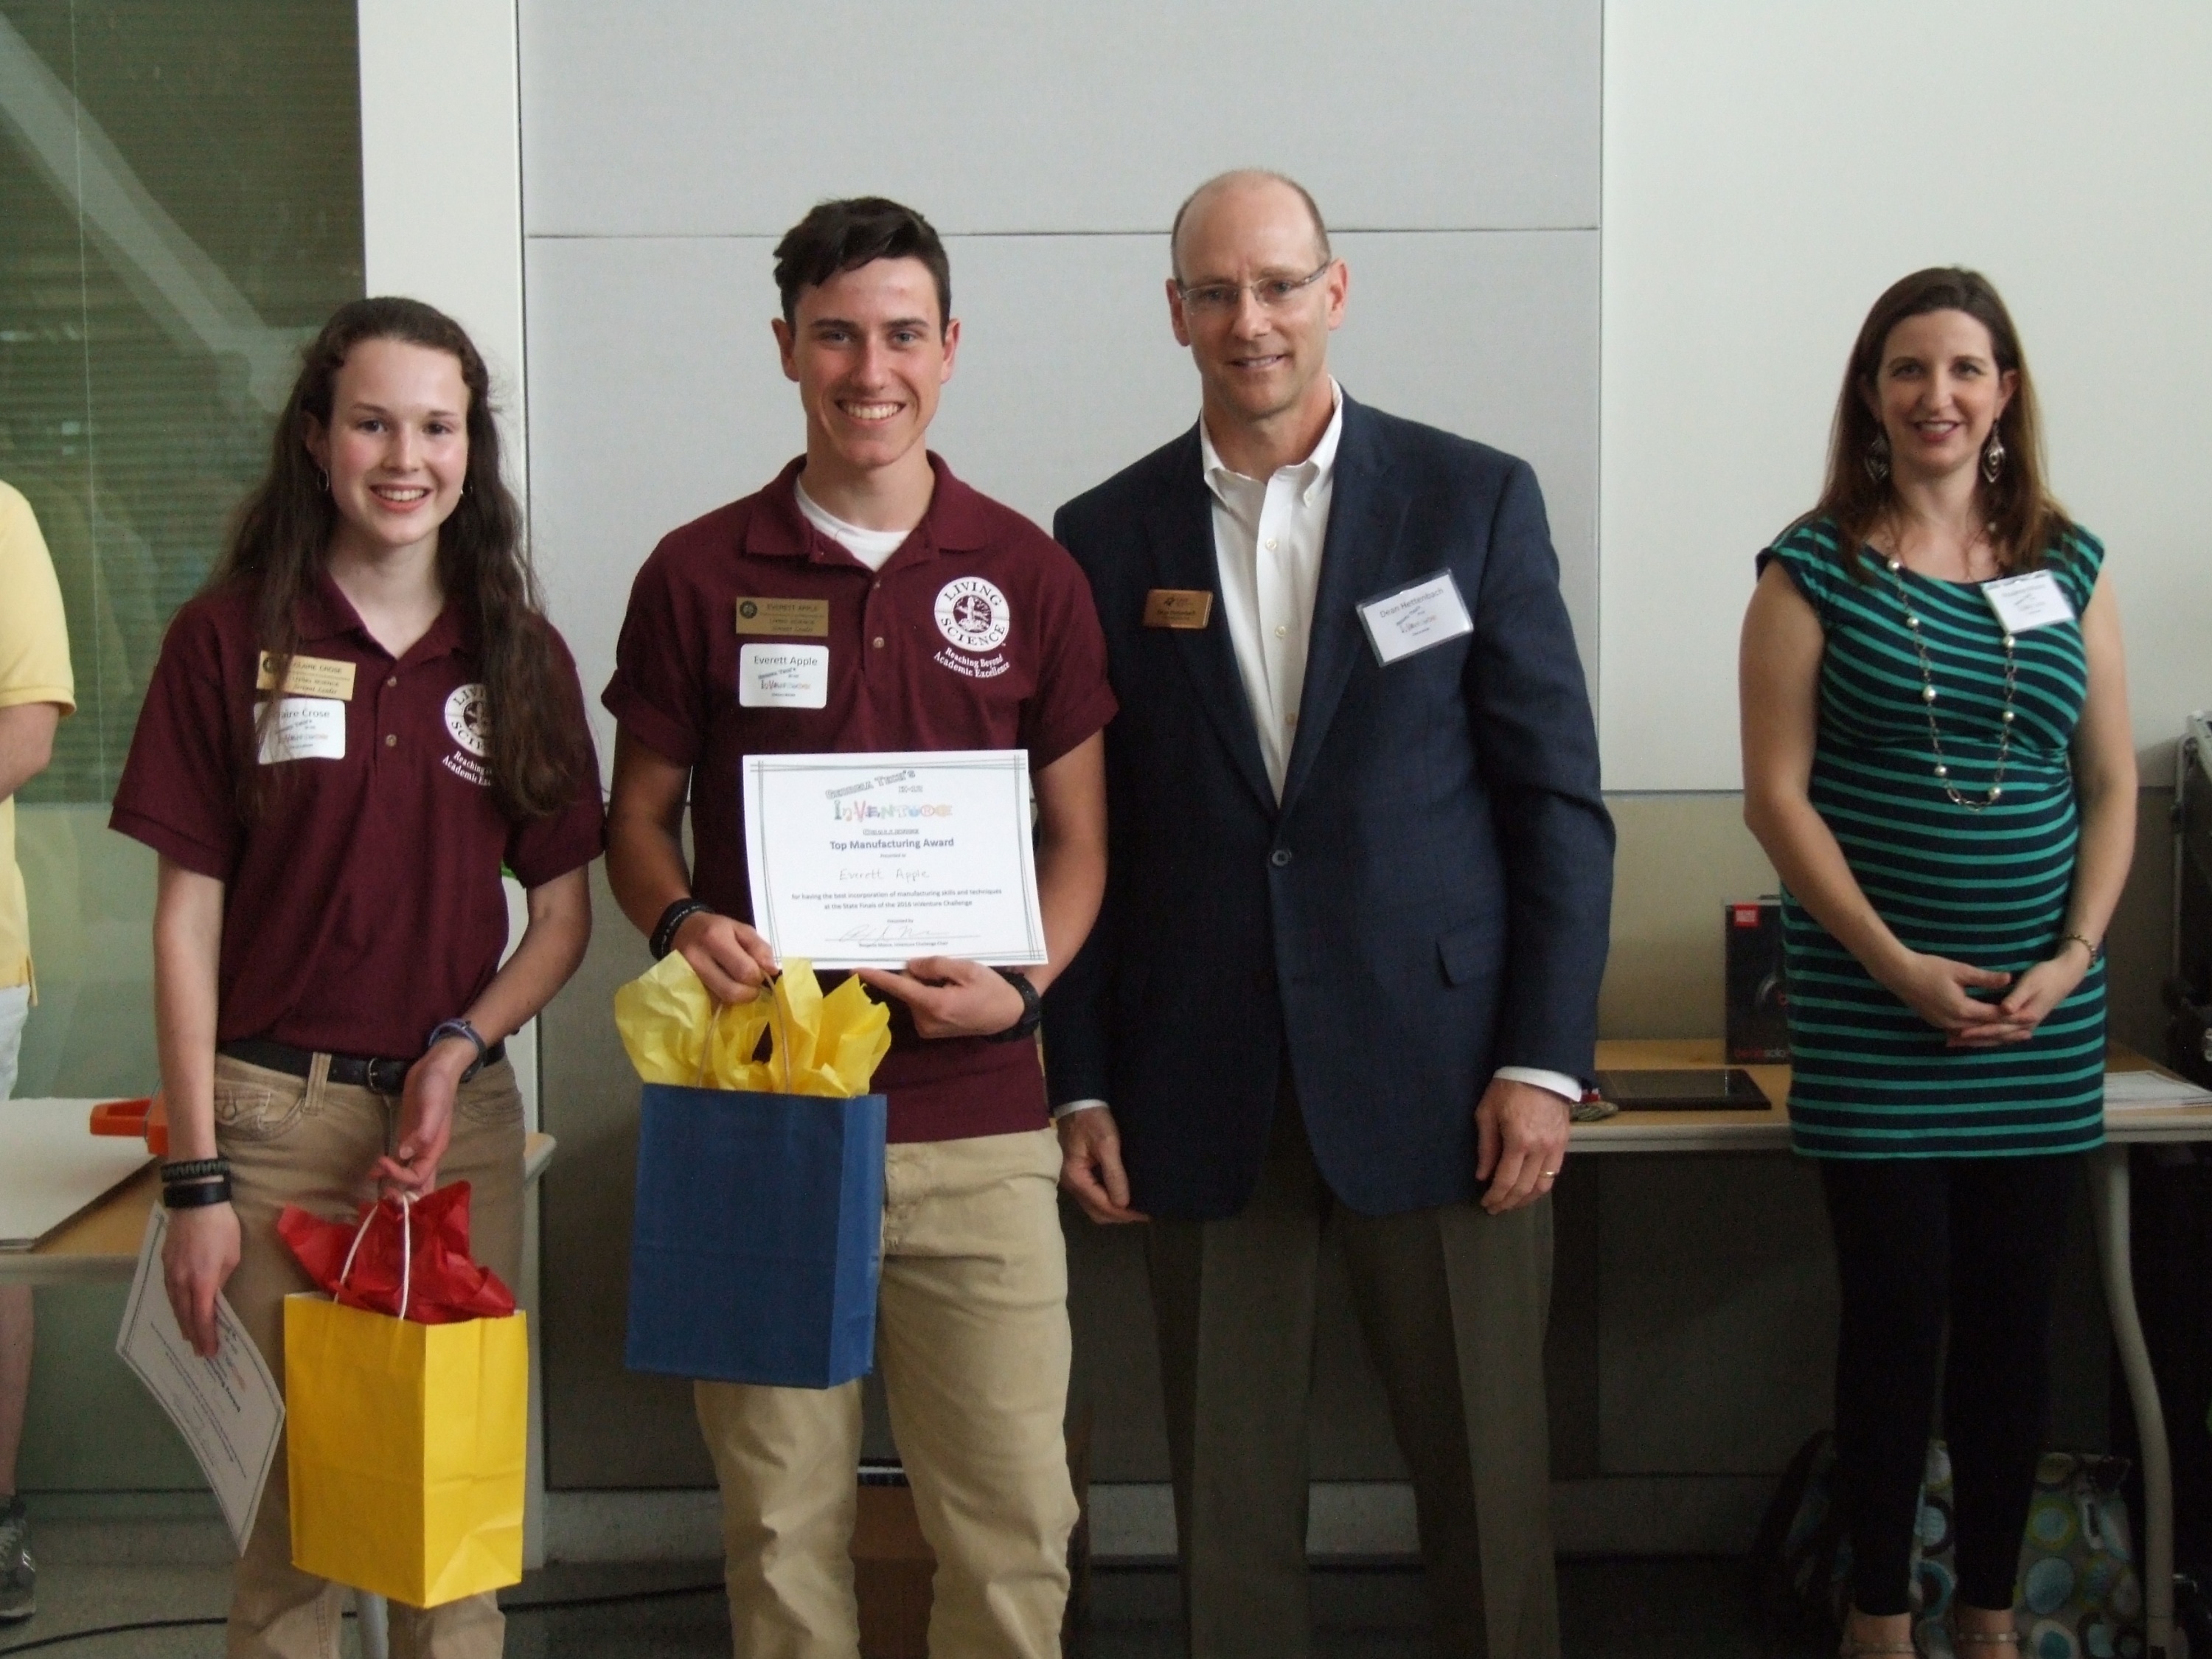 TAG Manufacturing Award Team: Wedge Tech School: Living Science School Students: Everett Apple, Claire Crose